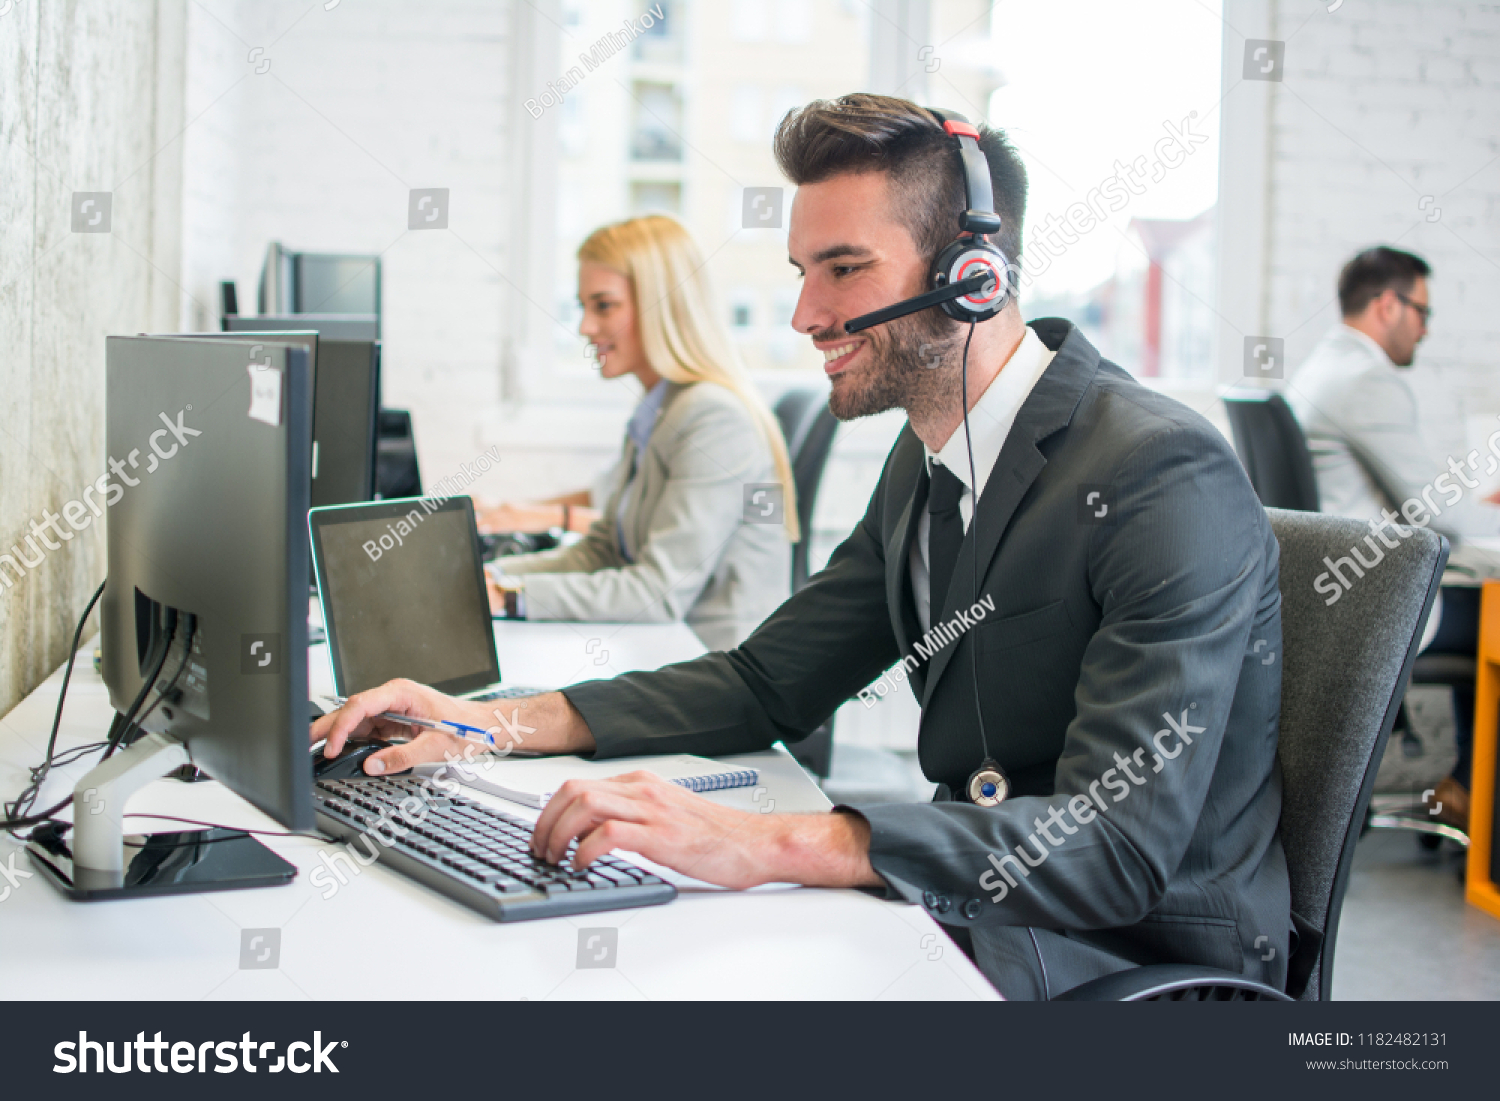 Portrait of a smiling young handsome man in formalwear with headset using computer in a office #1182482131